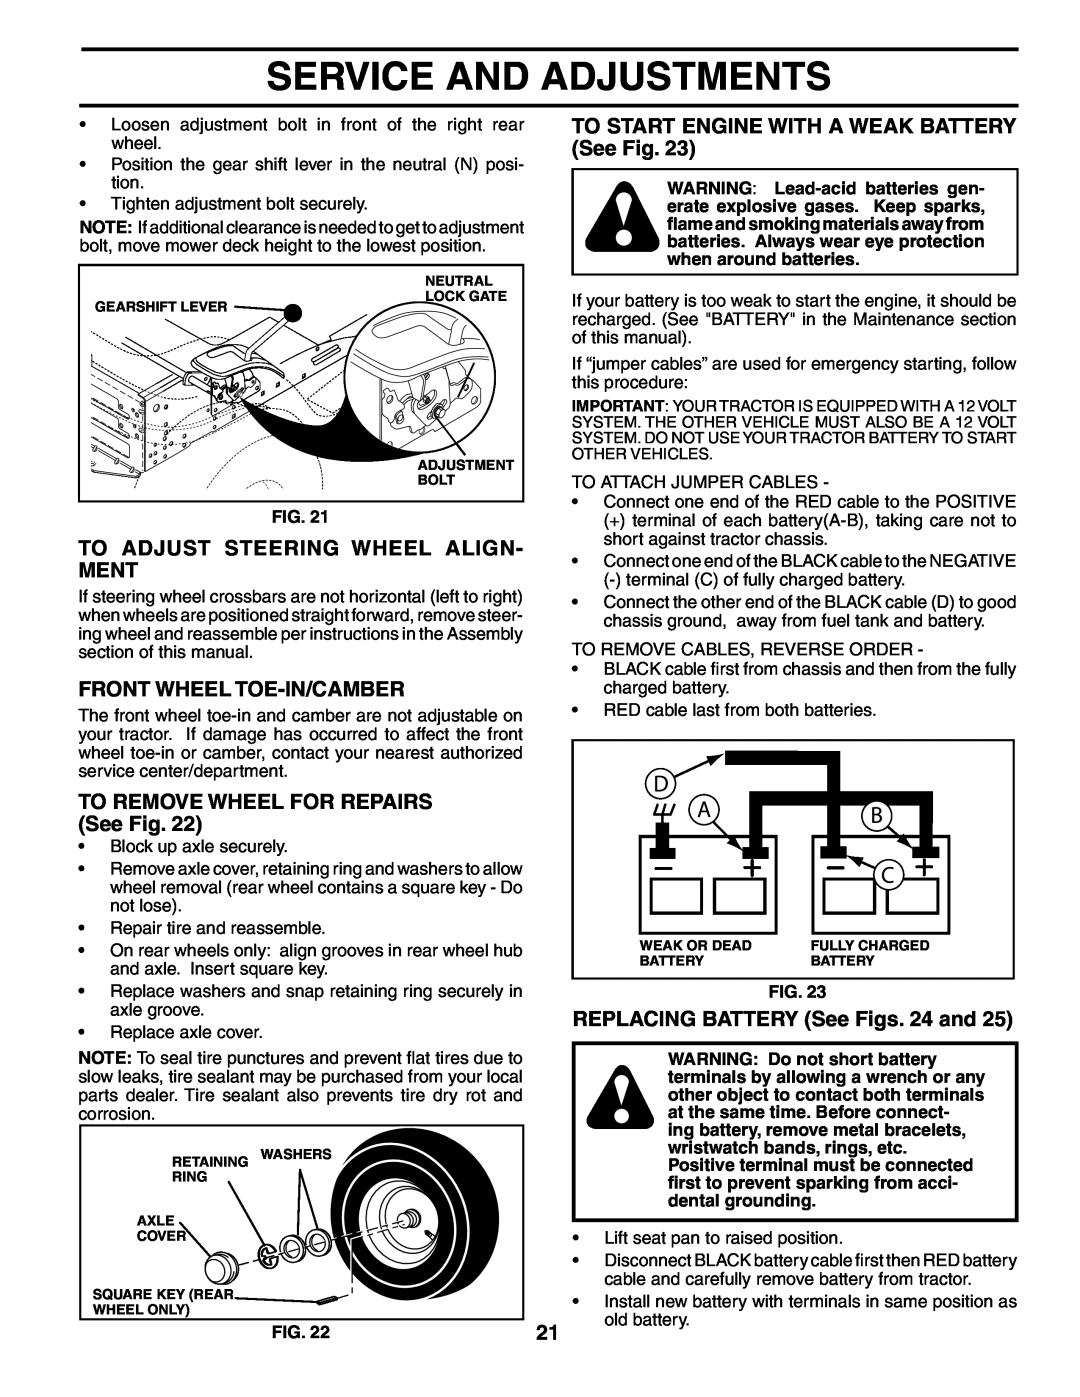 Poulan PO17542STB To Adjust Steering Wheel Align- Ment, Front Wheel Toe-In/Camber, TO REMOVE WHEEL FOR REPAIRS See Fig 